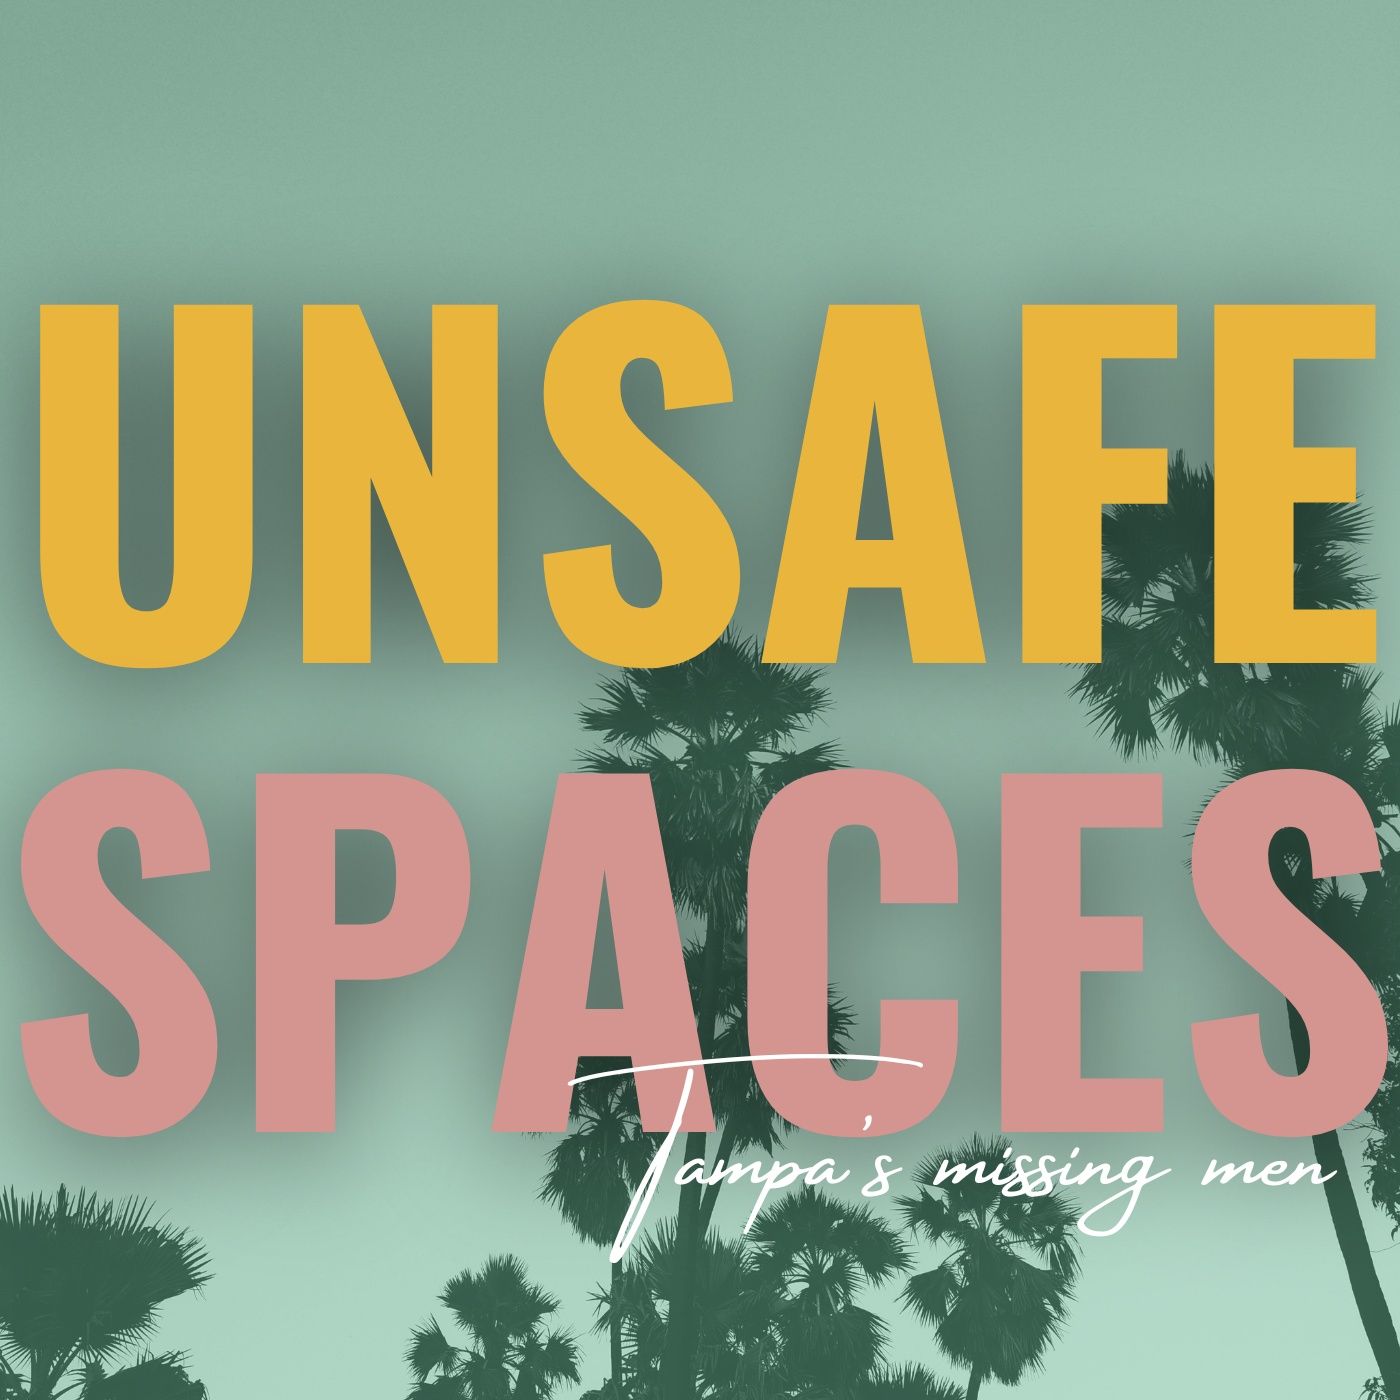 Check out my newest show: Unsafe Spaces